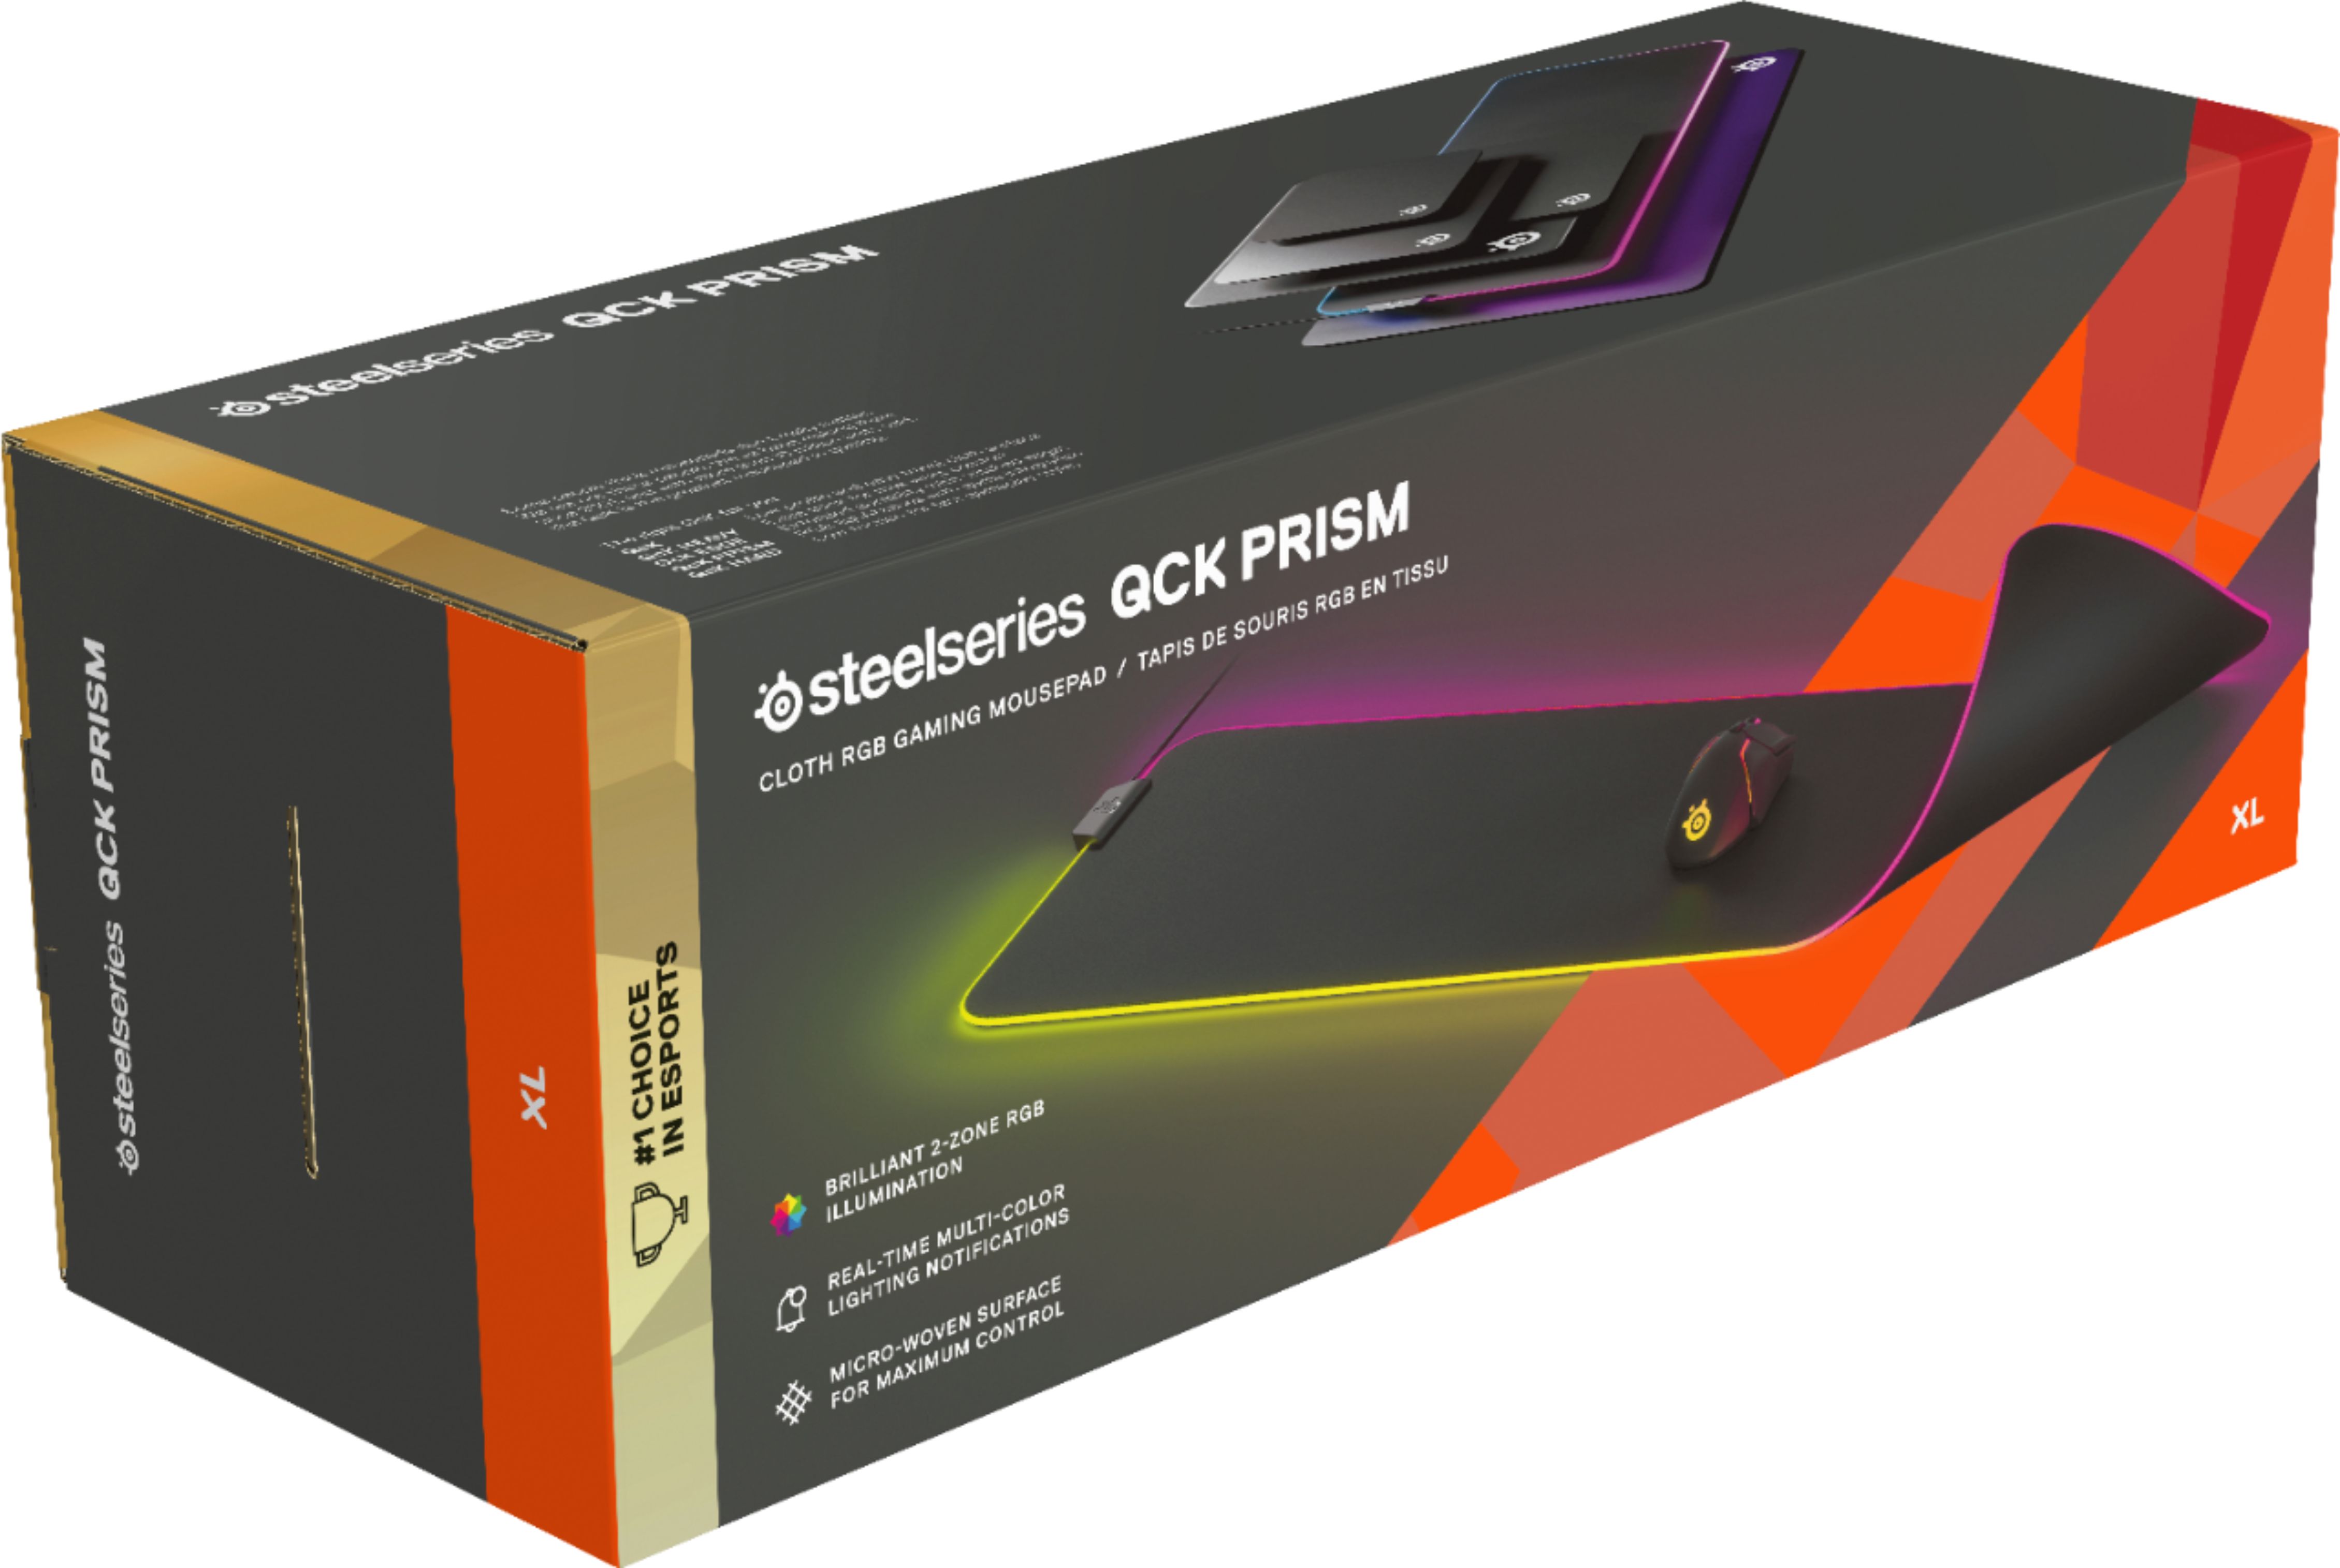 SteelSeries QcK Prism Cloth medium gaming mouse pad offers 16